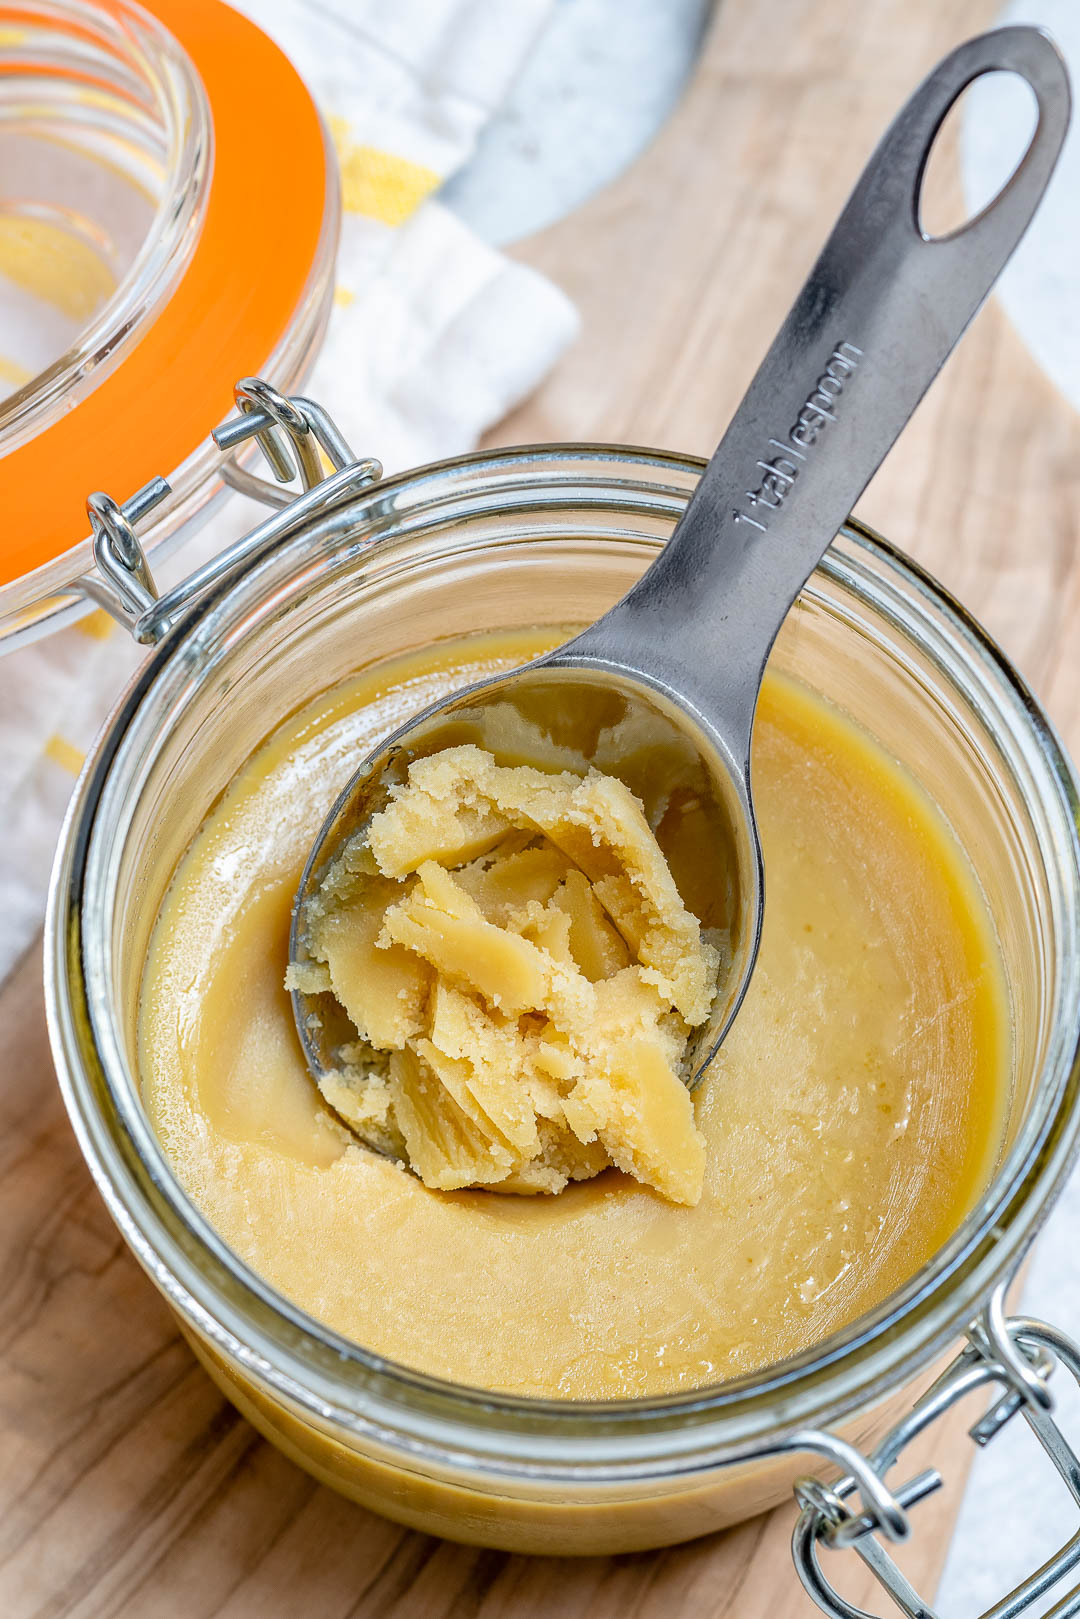 How To Make Your Own Homemade Ghee!